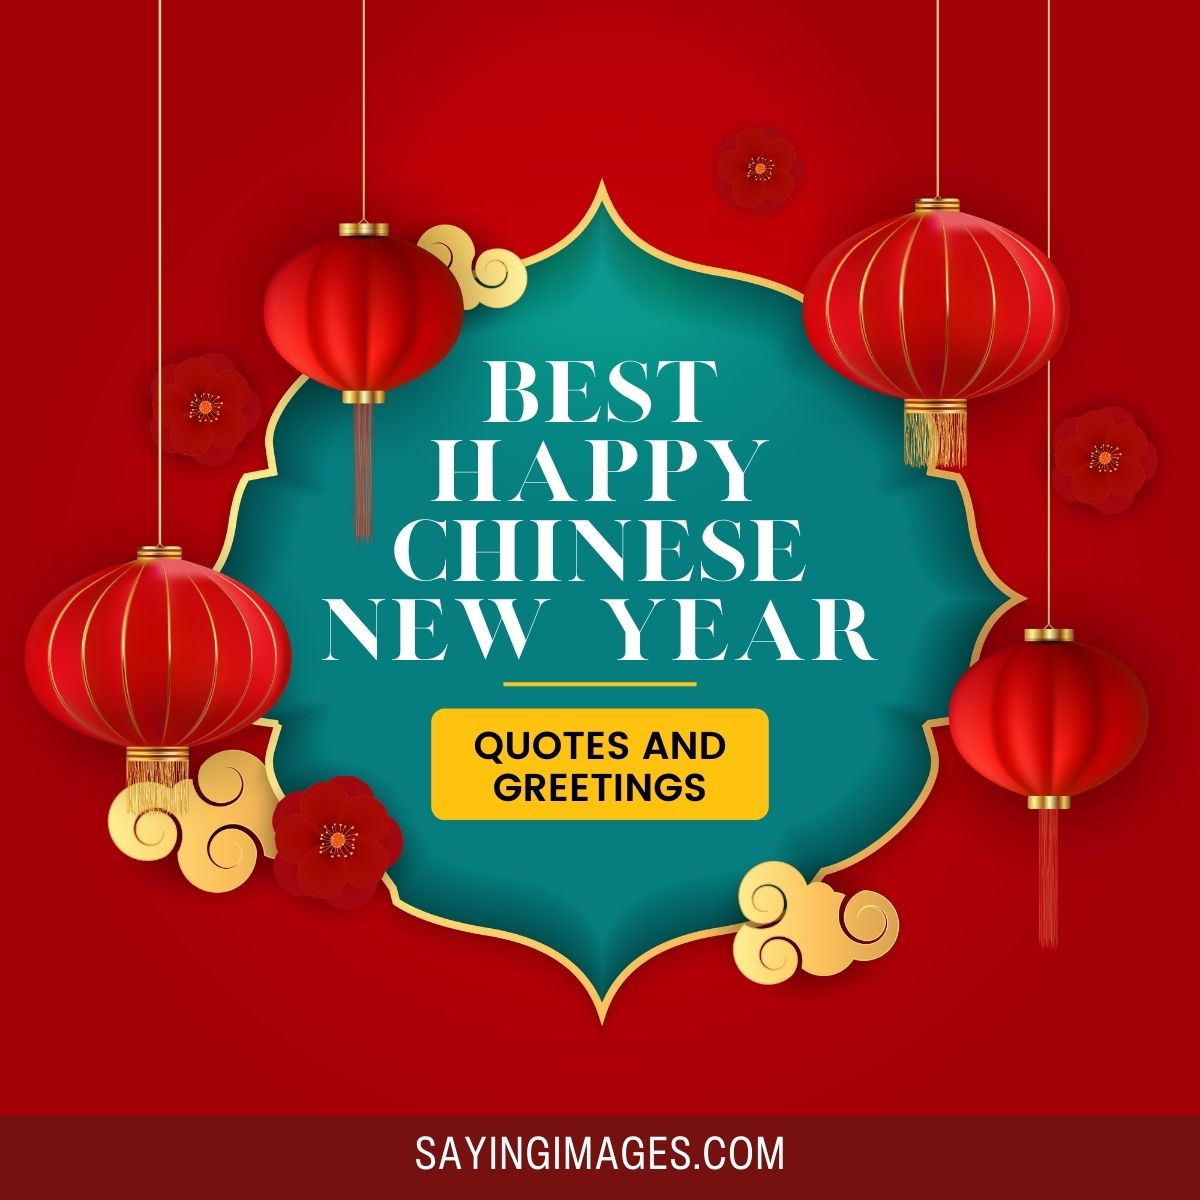 Best Happy Chinese New Year Quotes And Greetings